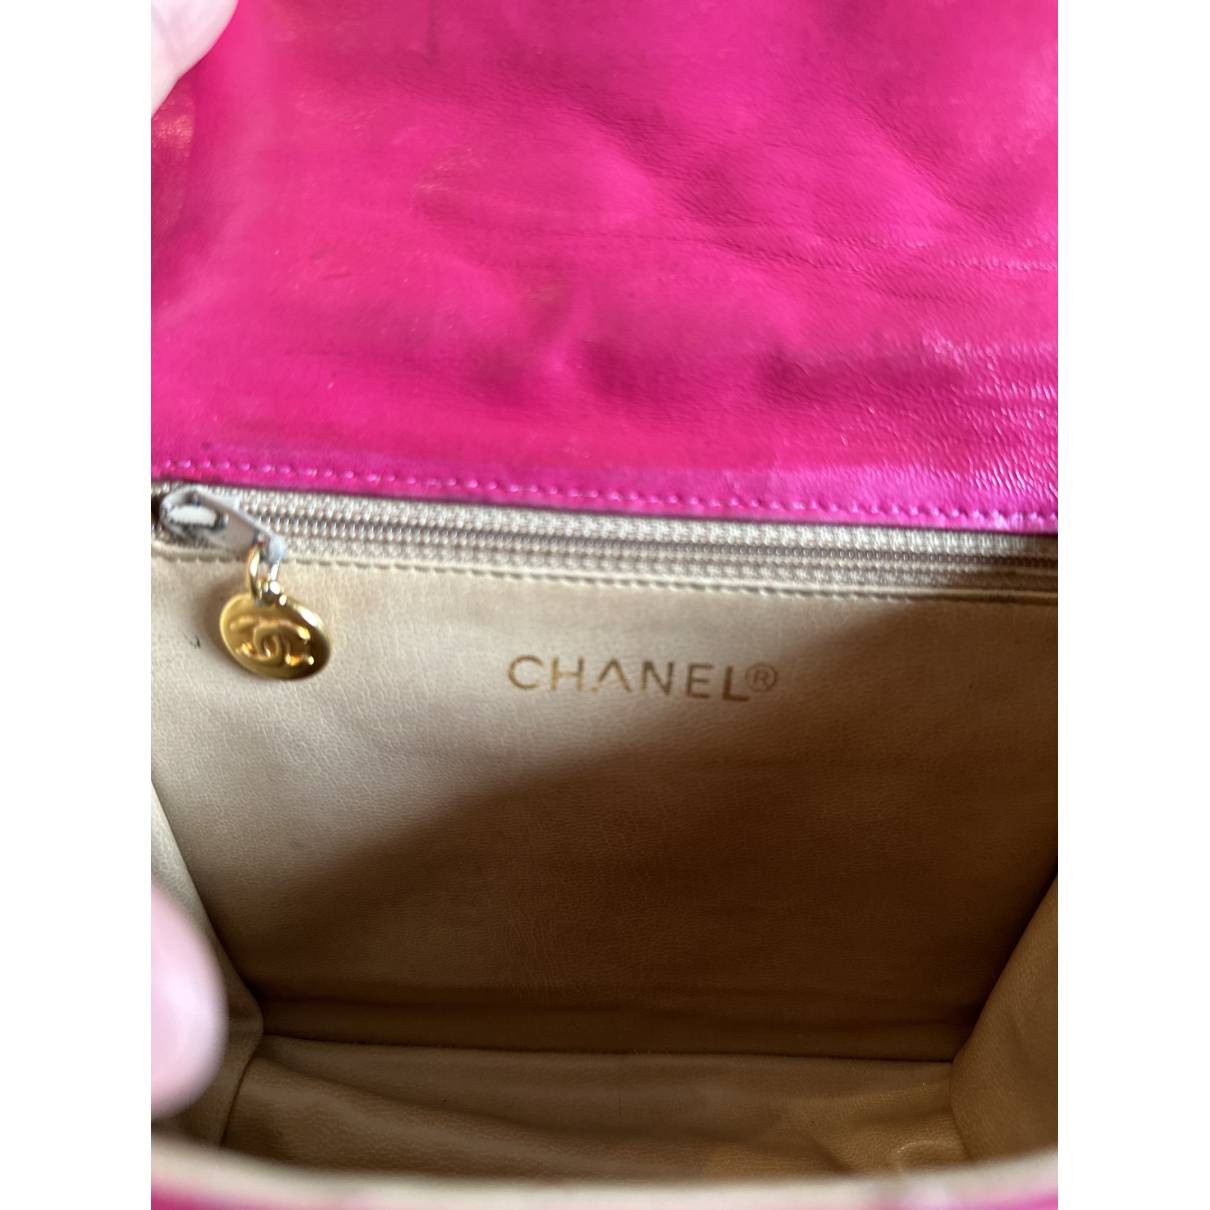 Chanel - Authenticated Timeless/Classique Handbag - Leather Pink for Women, Good Condition